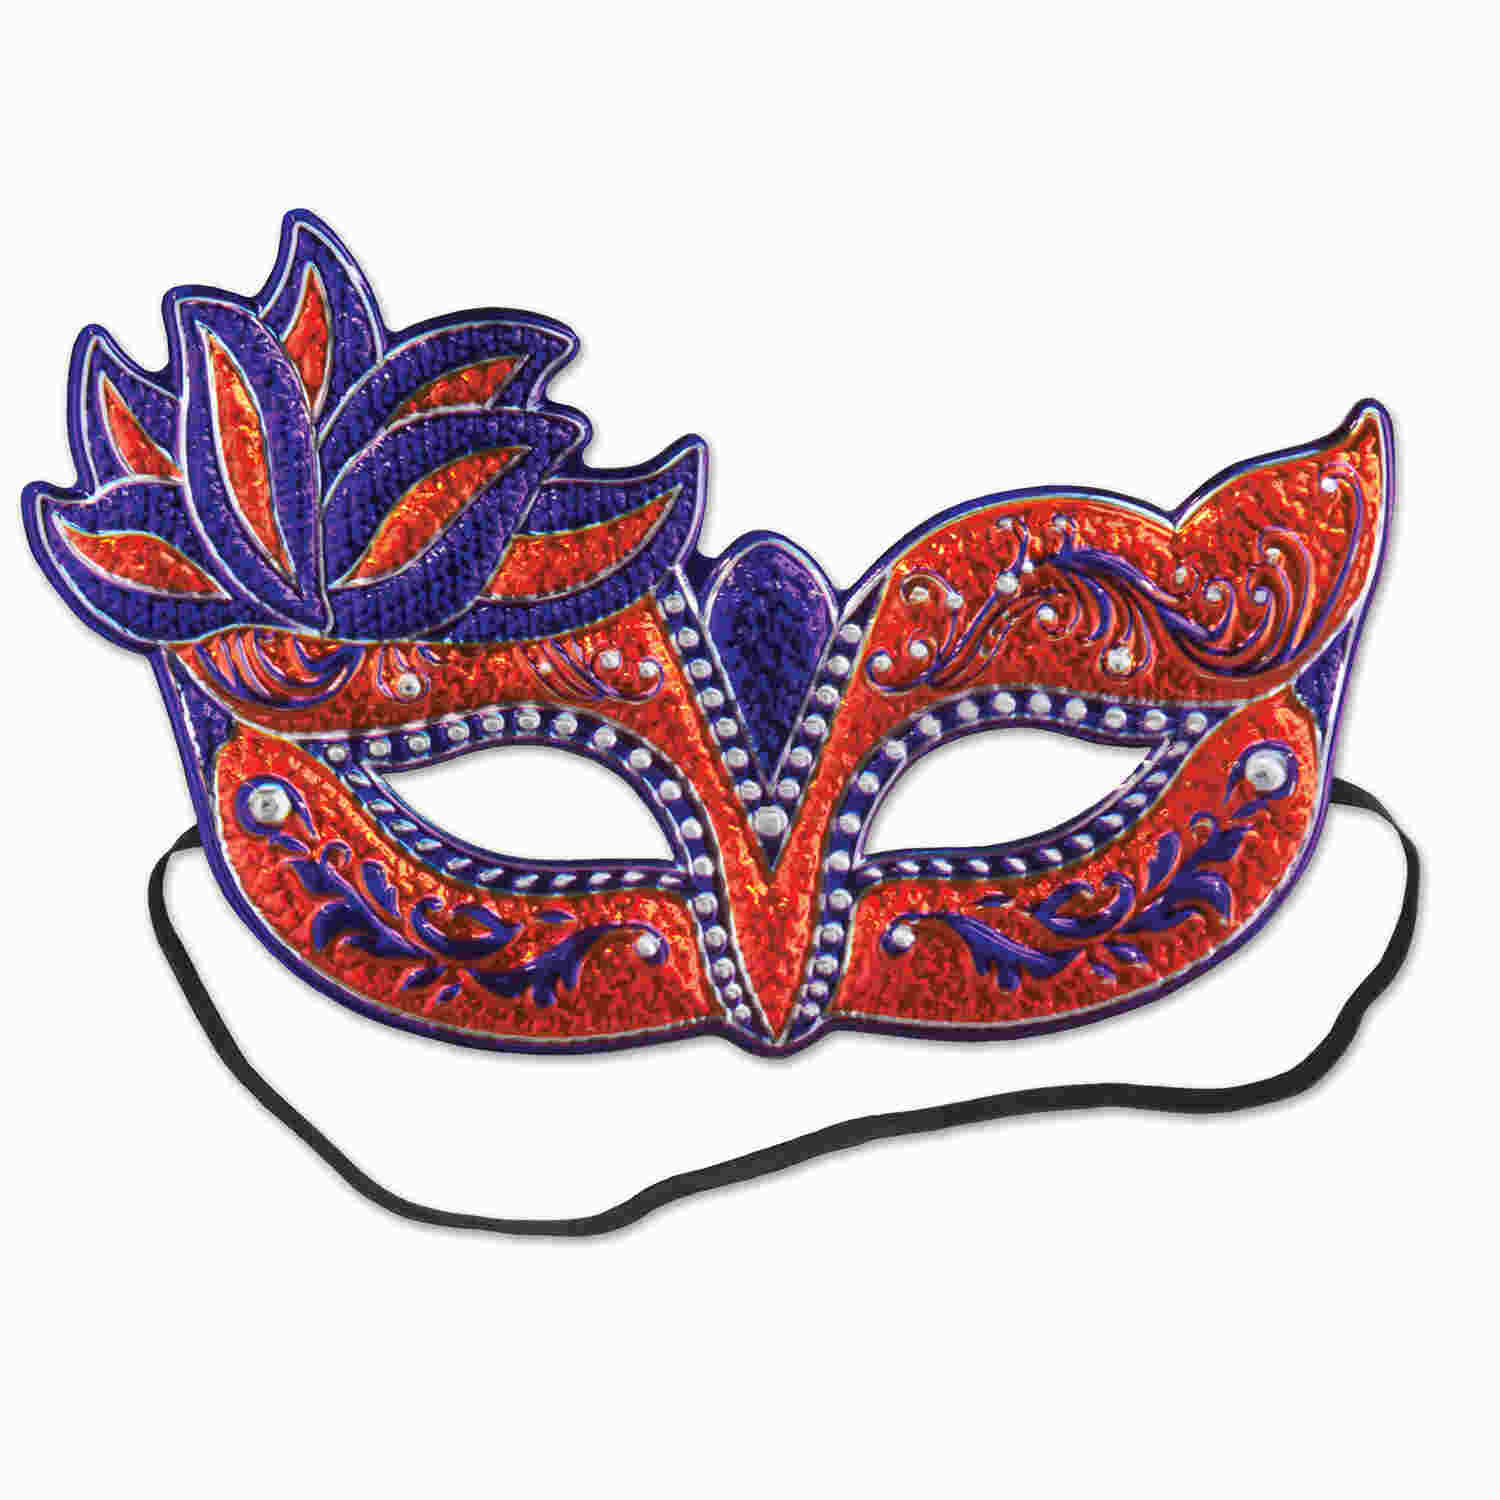 http://www.partyexpress.com/Shared/Images/Product/Costume-Mask-Pack-of-12/60332GimpCompressed.jpg